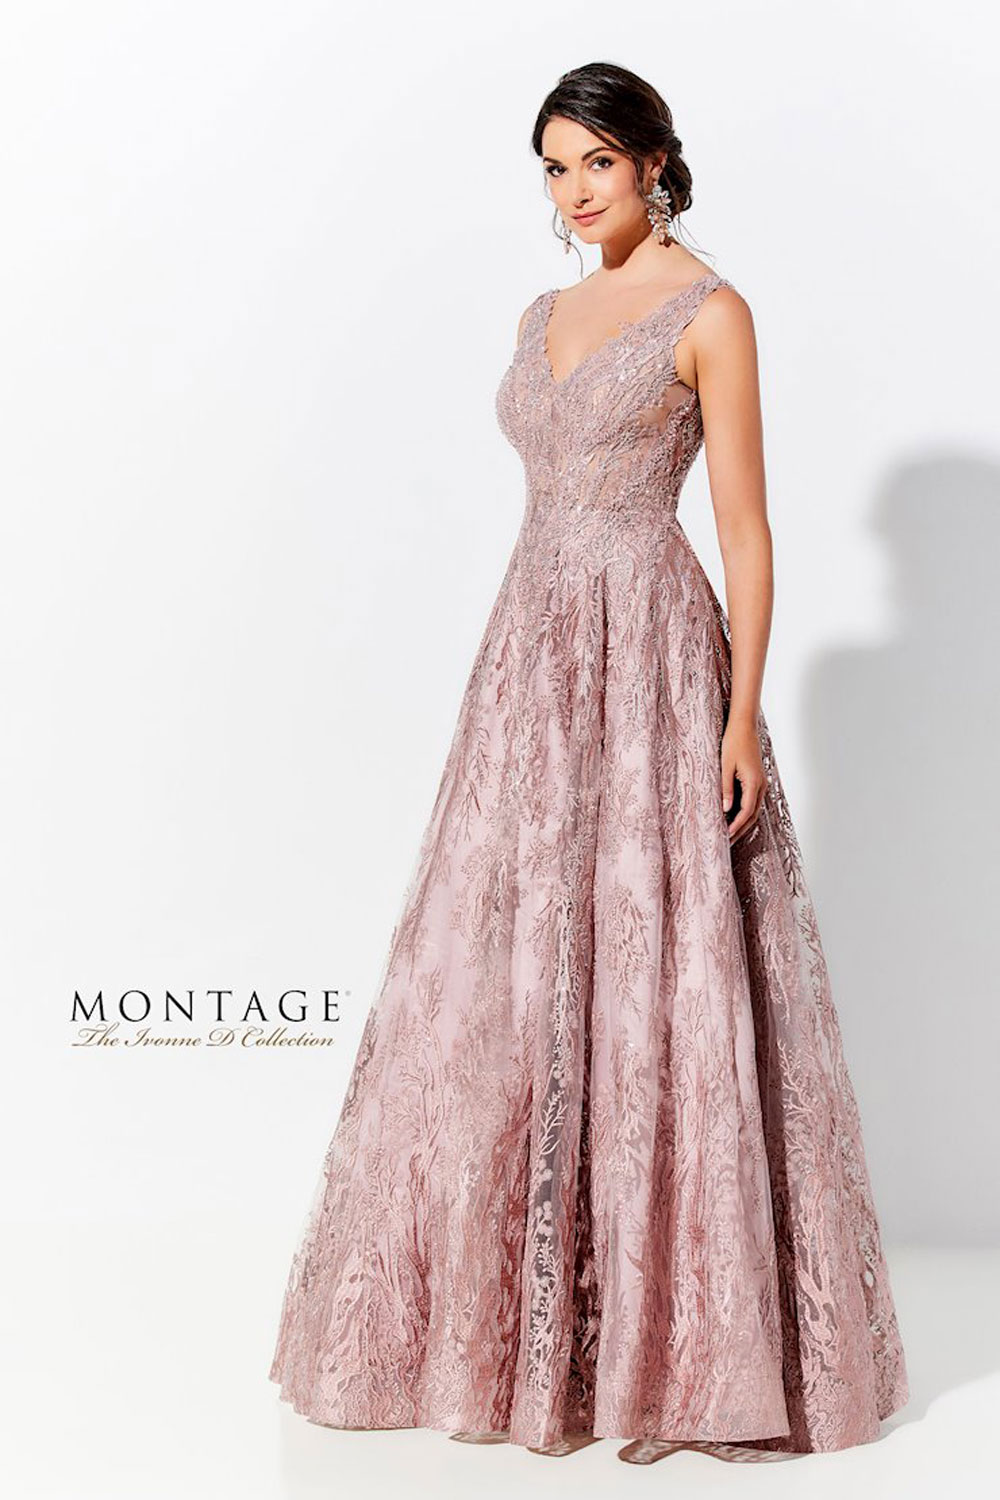 Ball gown evening dress, with illusion V-neckline & detachable flutter sleeves